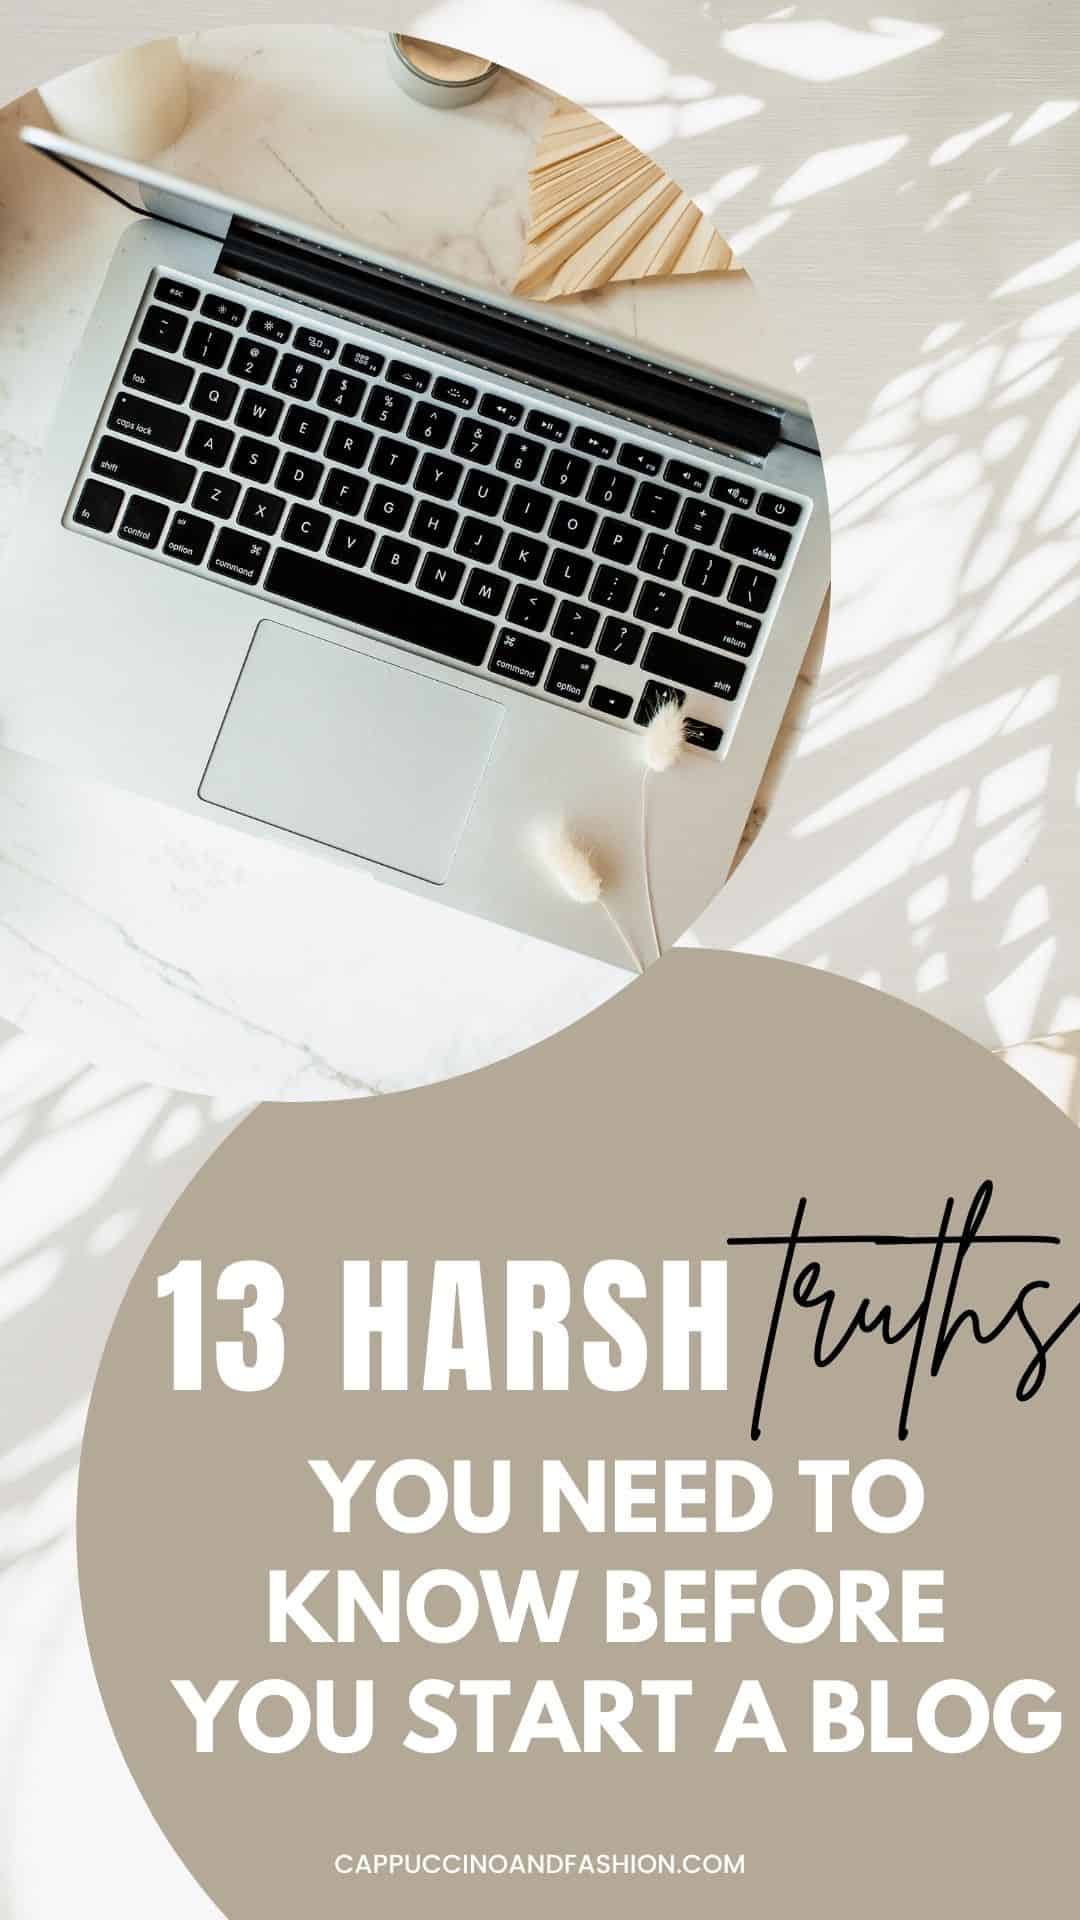 13 Harsh truths About Blogging You need to know before starting a blog